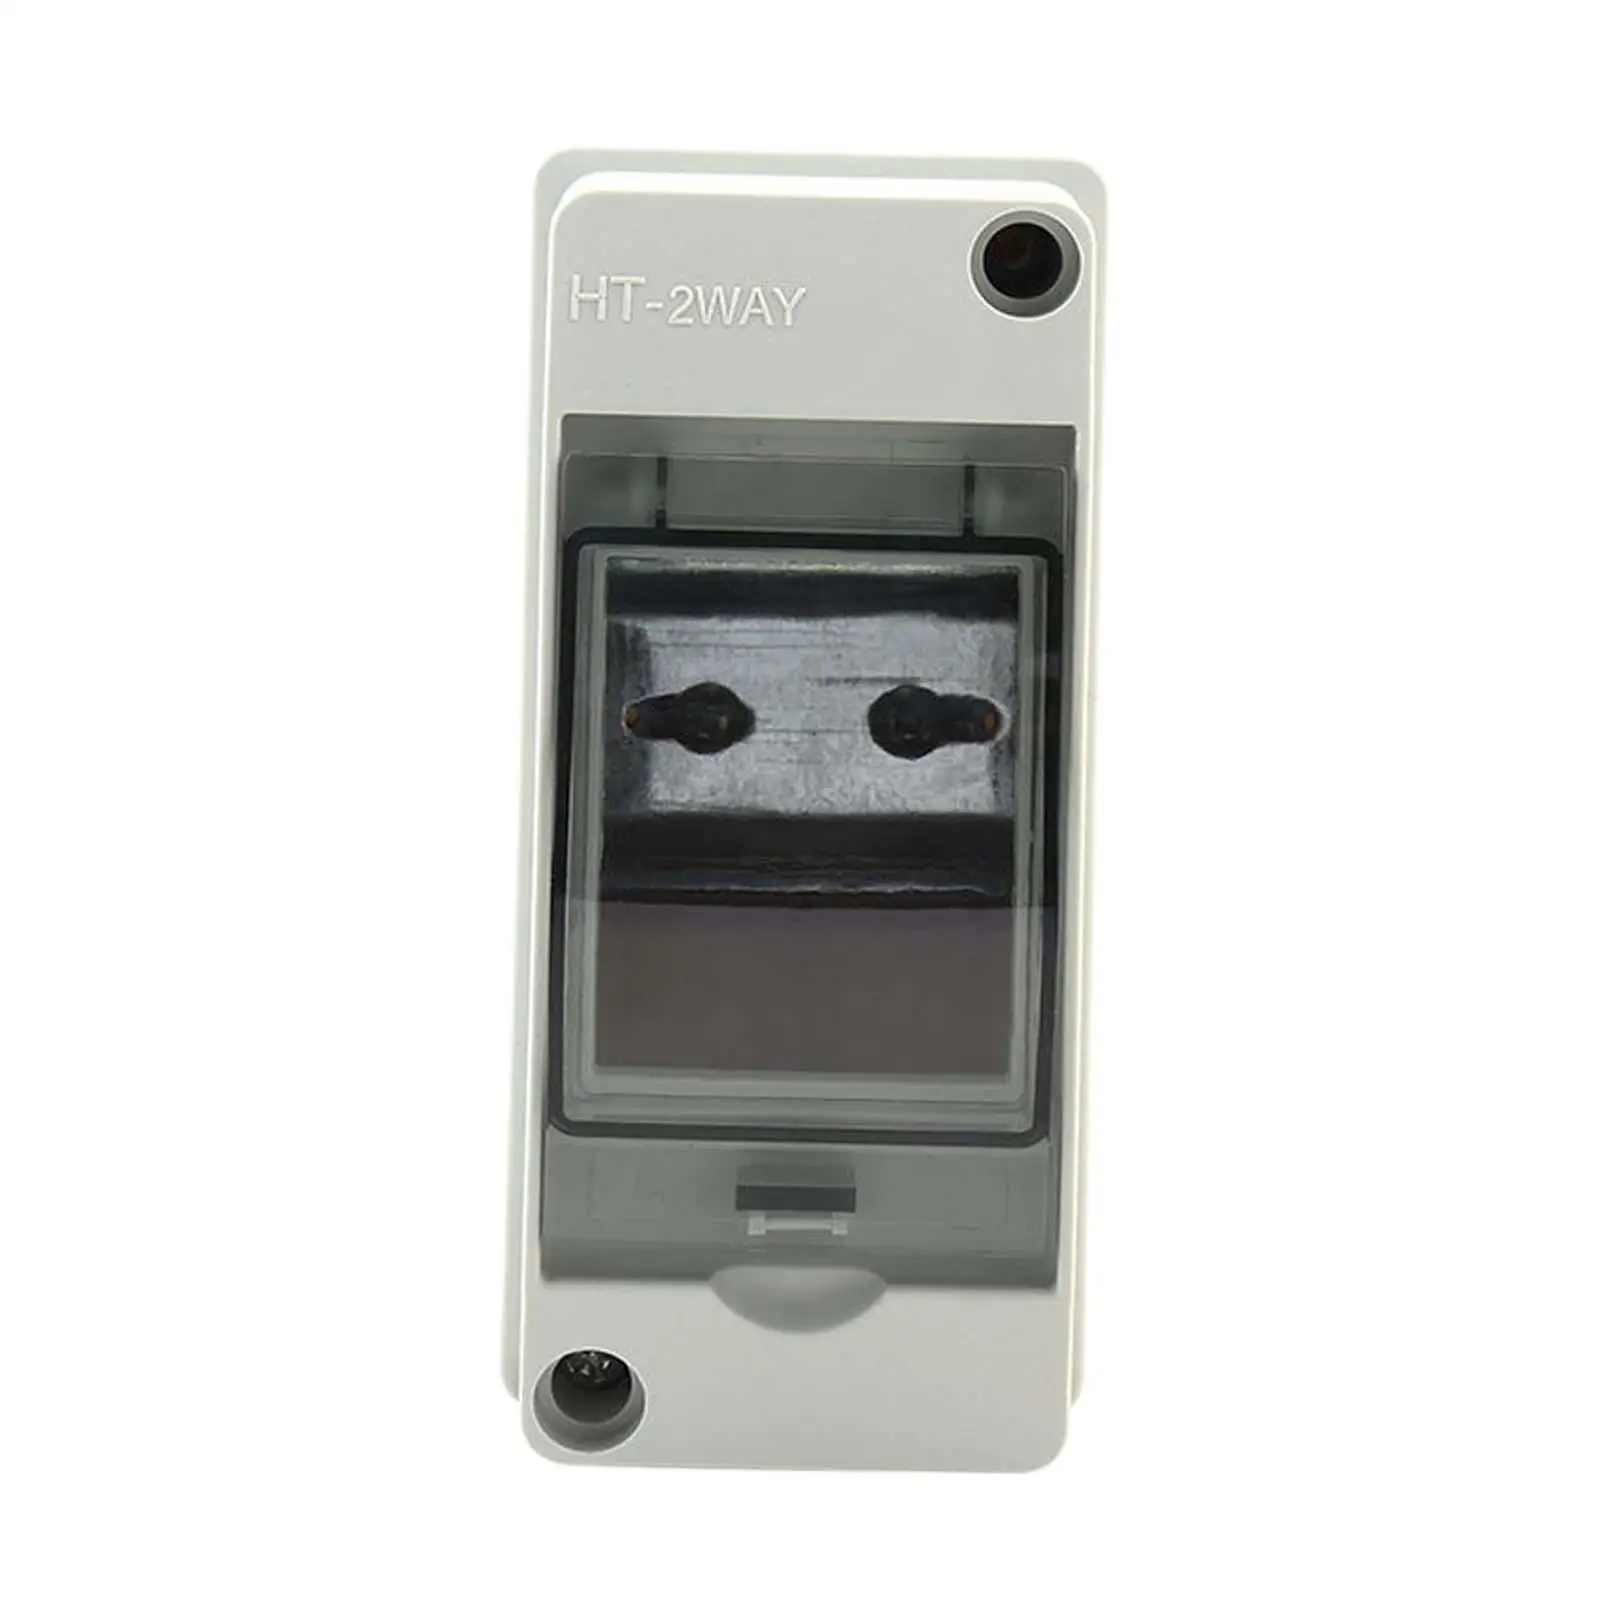 Power Distribution Protection Box Outdoor Breaker Box Waterproof Distribution Box for Home Indoor and Outdoor Wall